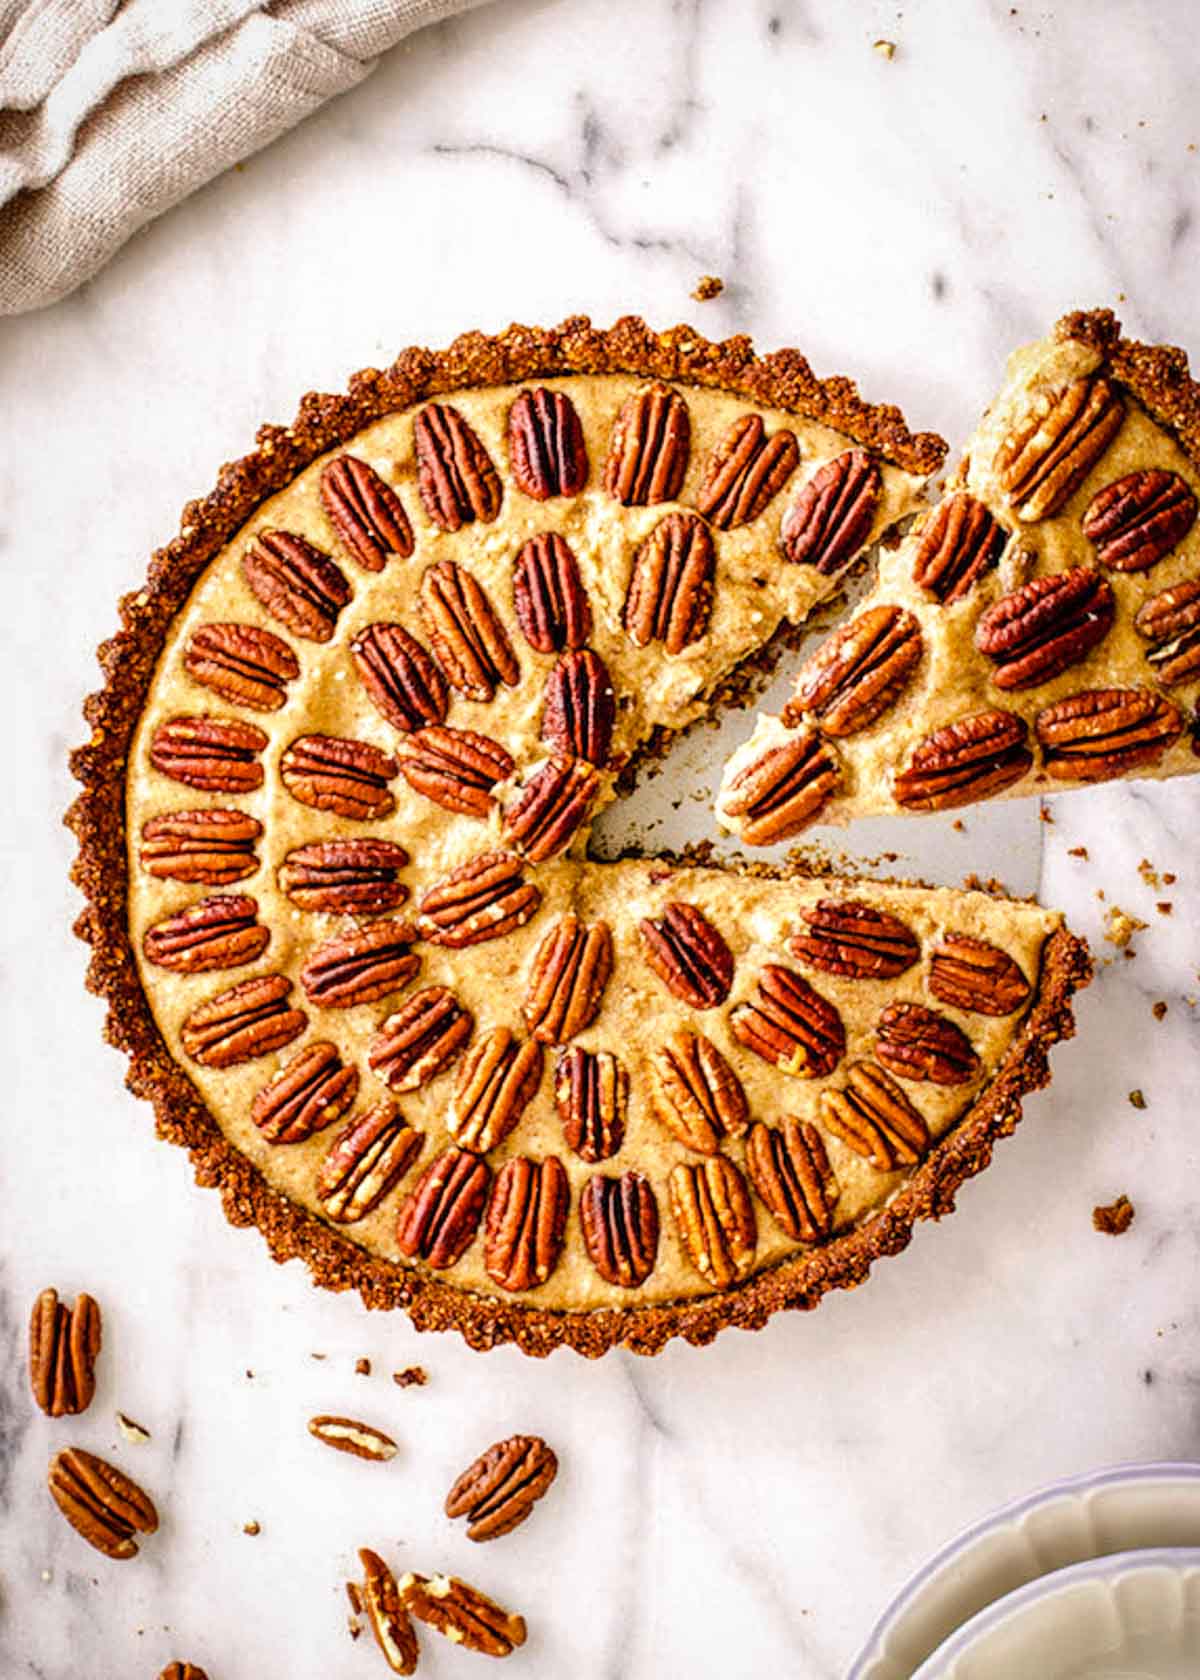 Round gluten free vegan pecan pie decorated with pecans in concentric circles, sitting on a marble background. A slice is being taken out of the pie.